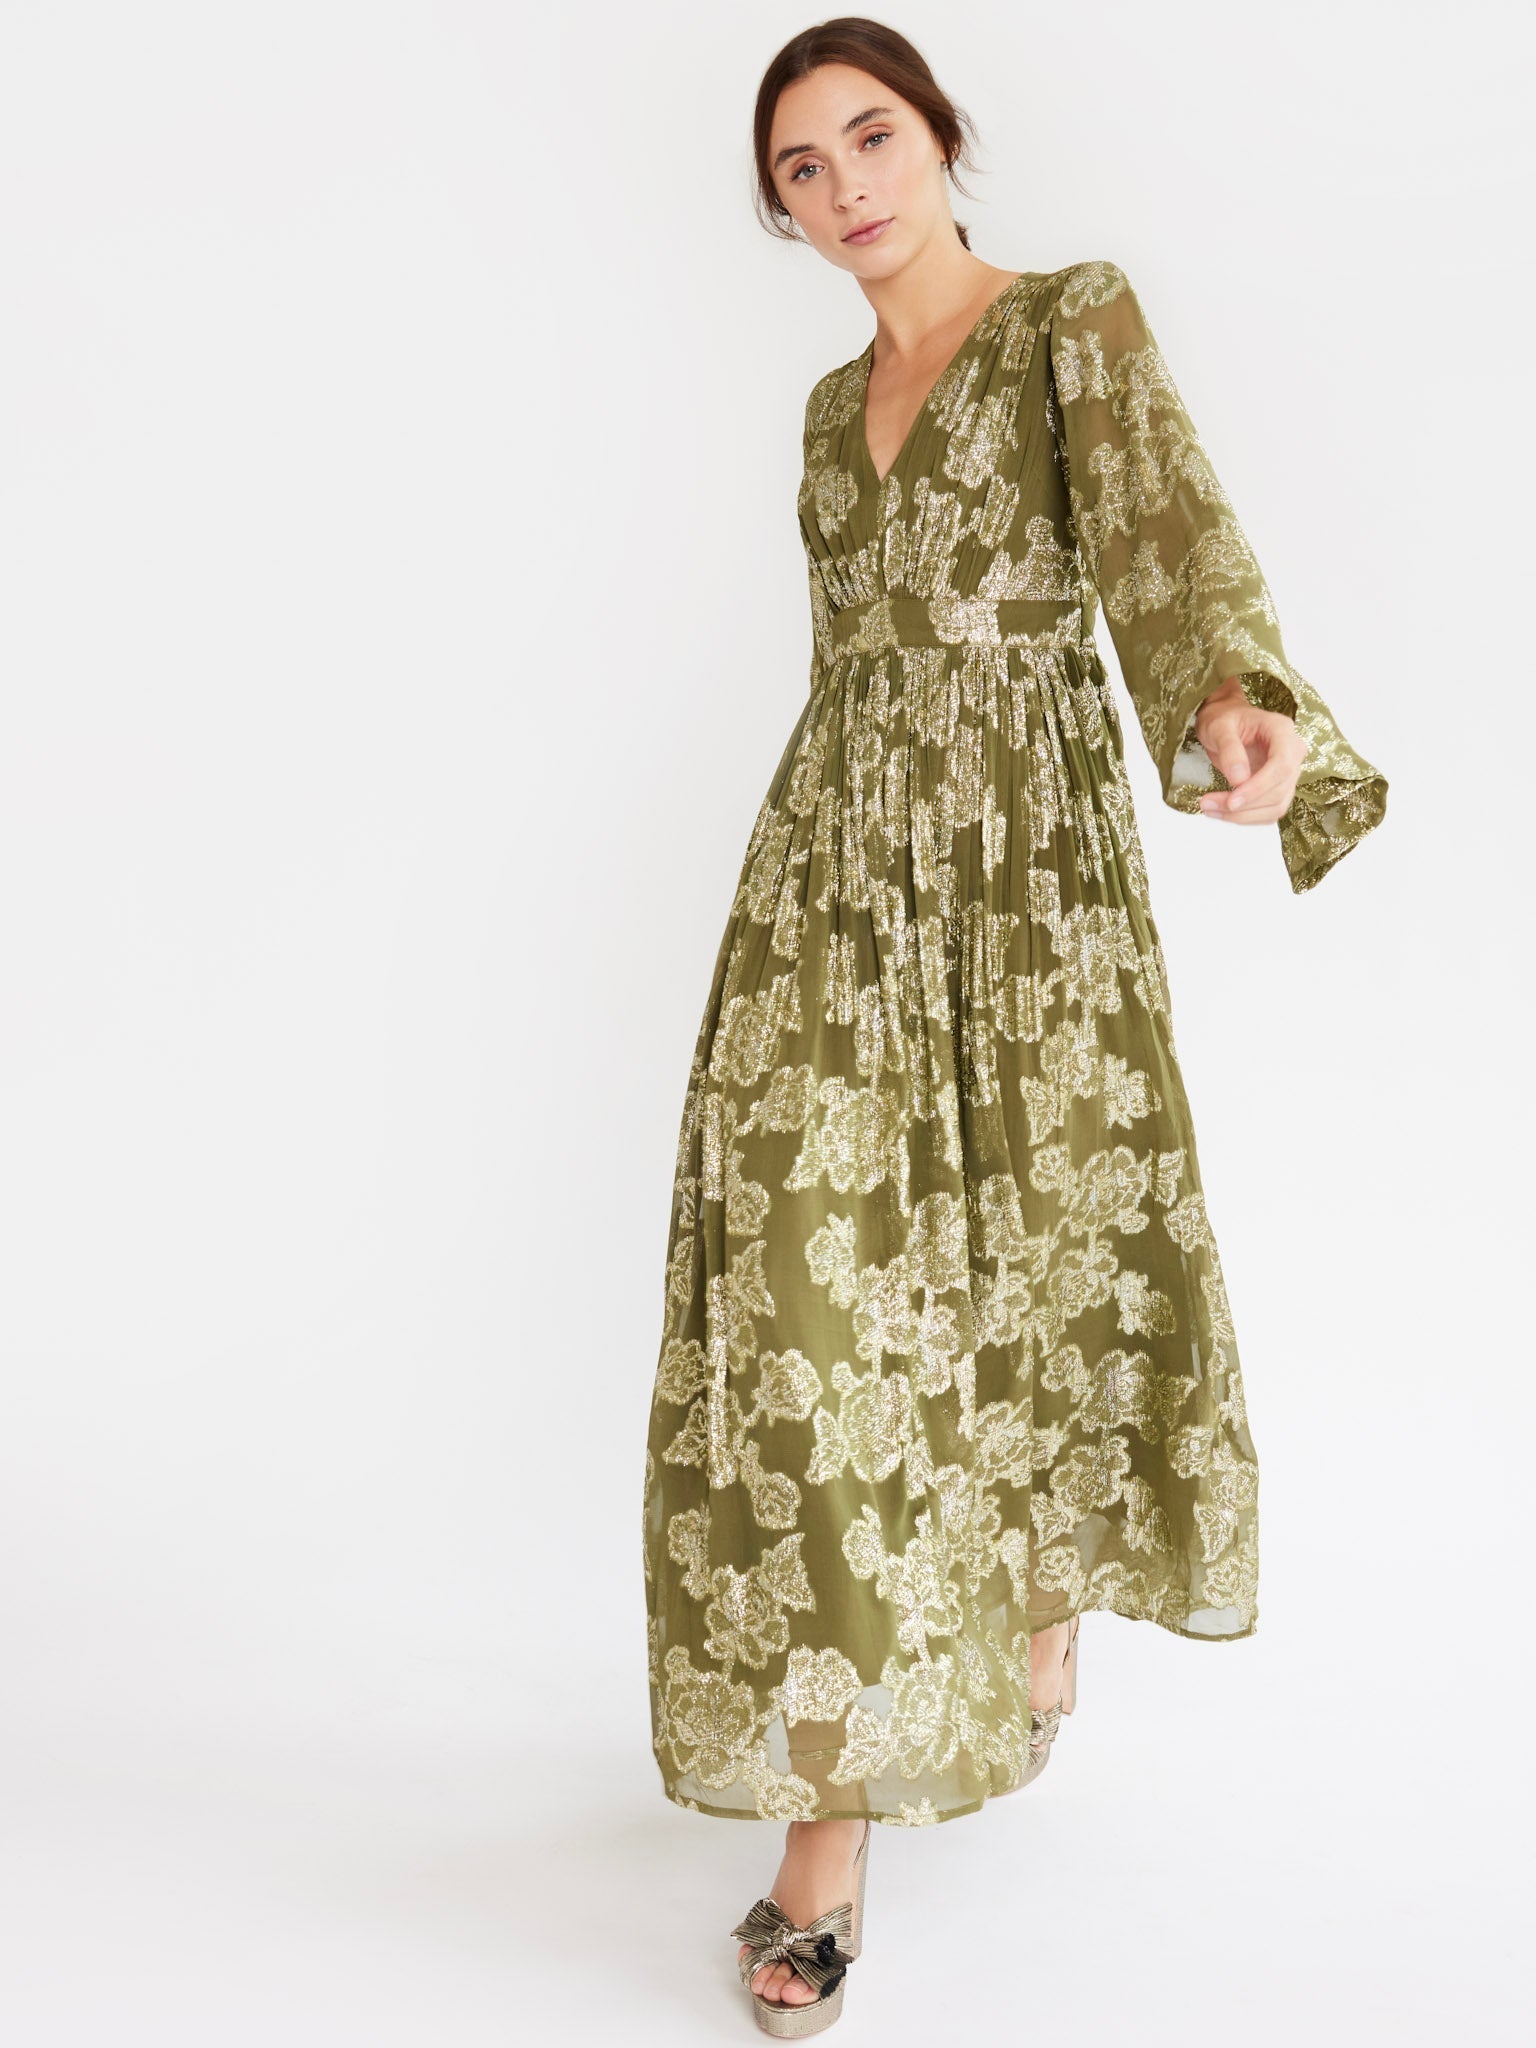 MILLE Clothing Caye Dress in Gold Leaf